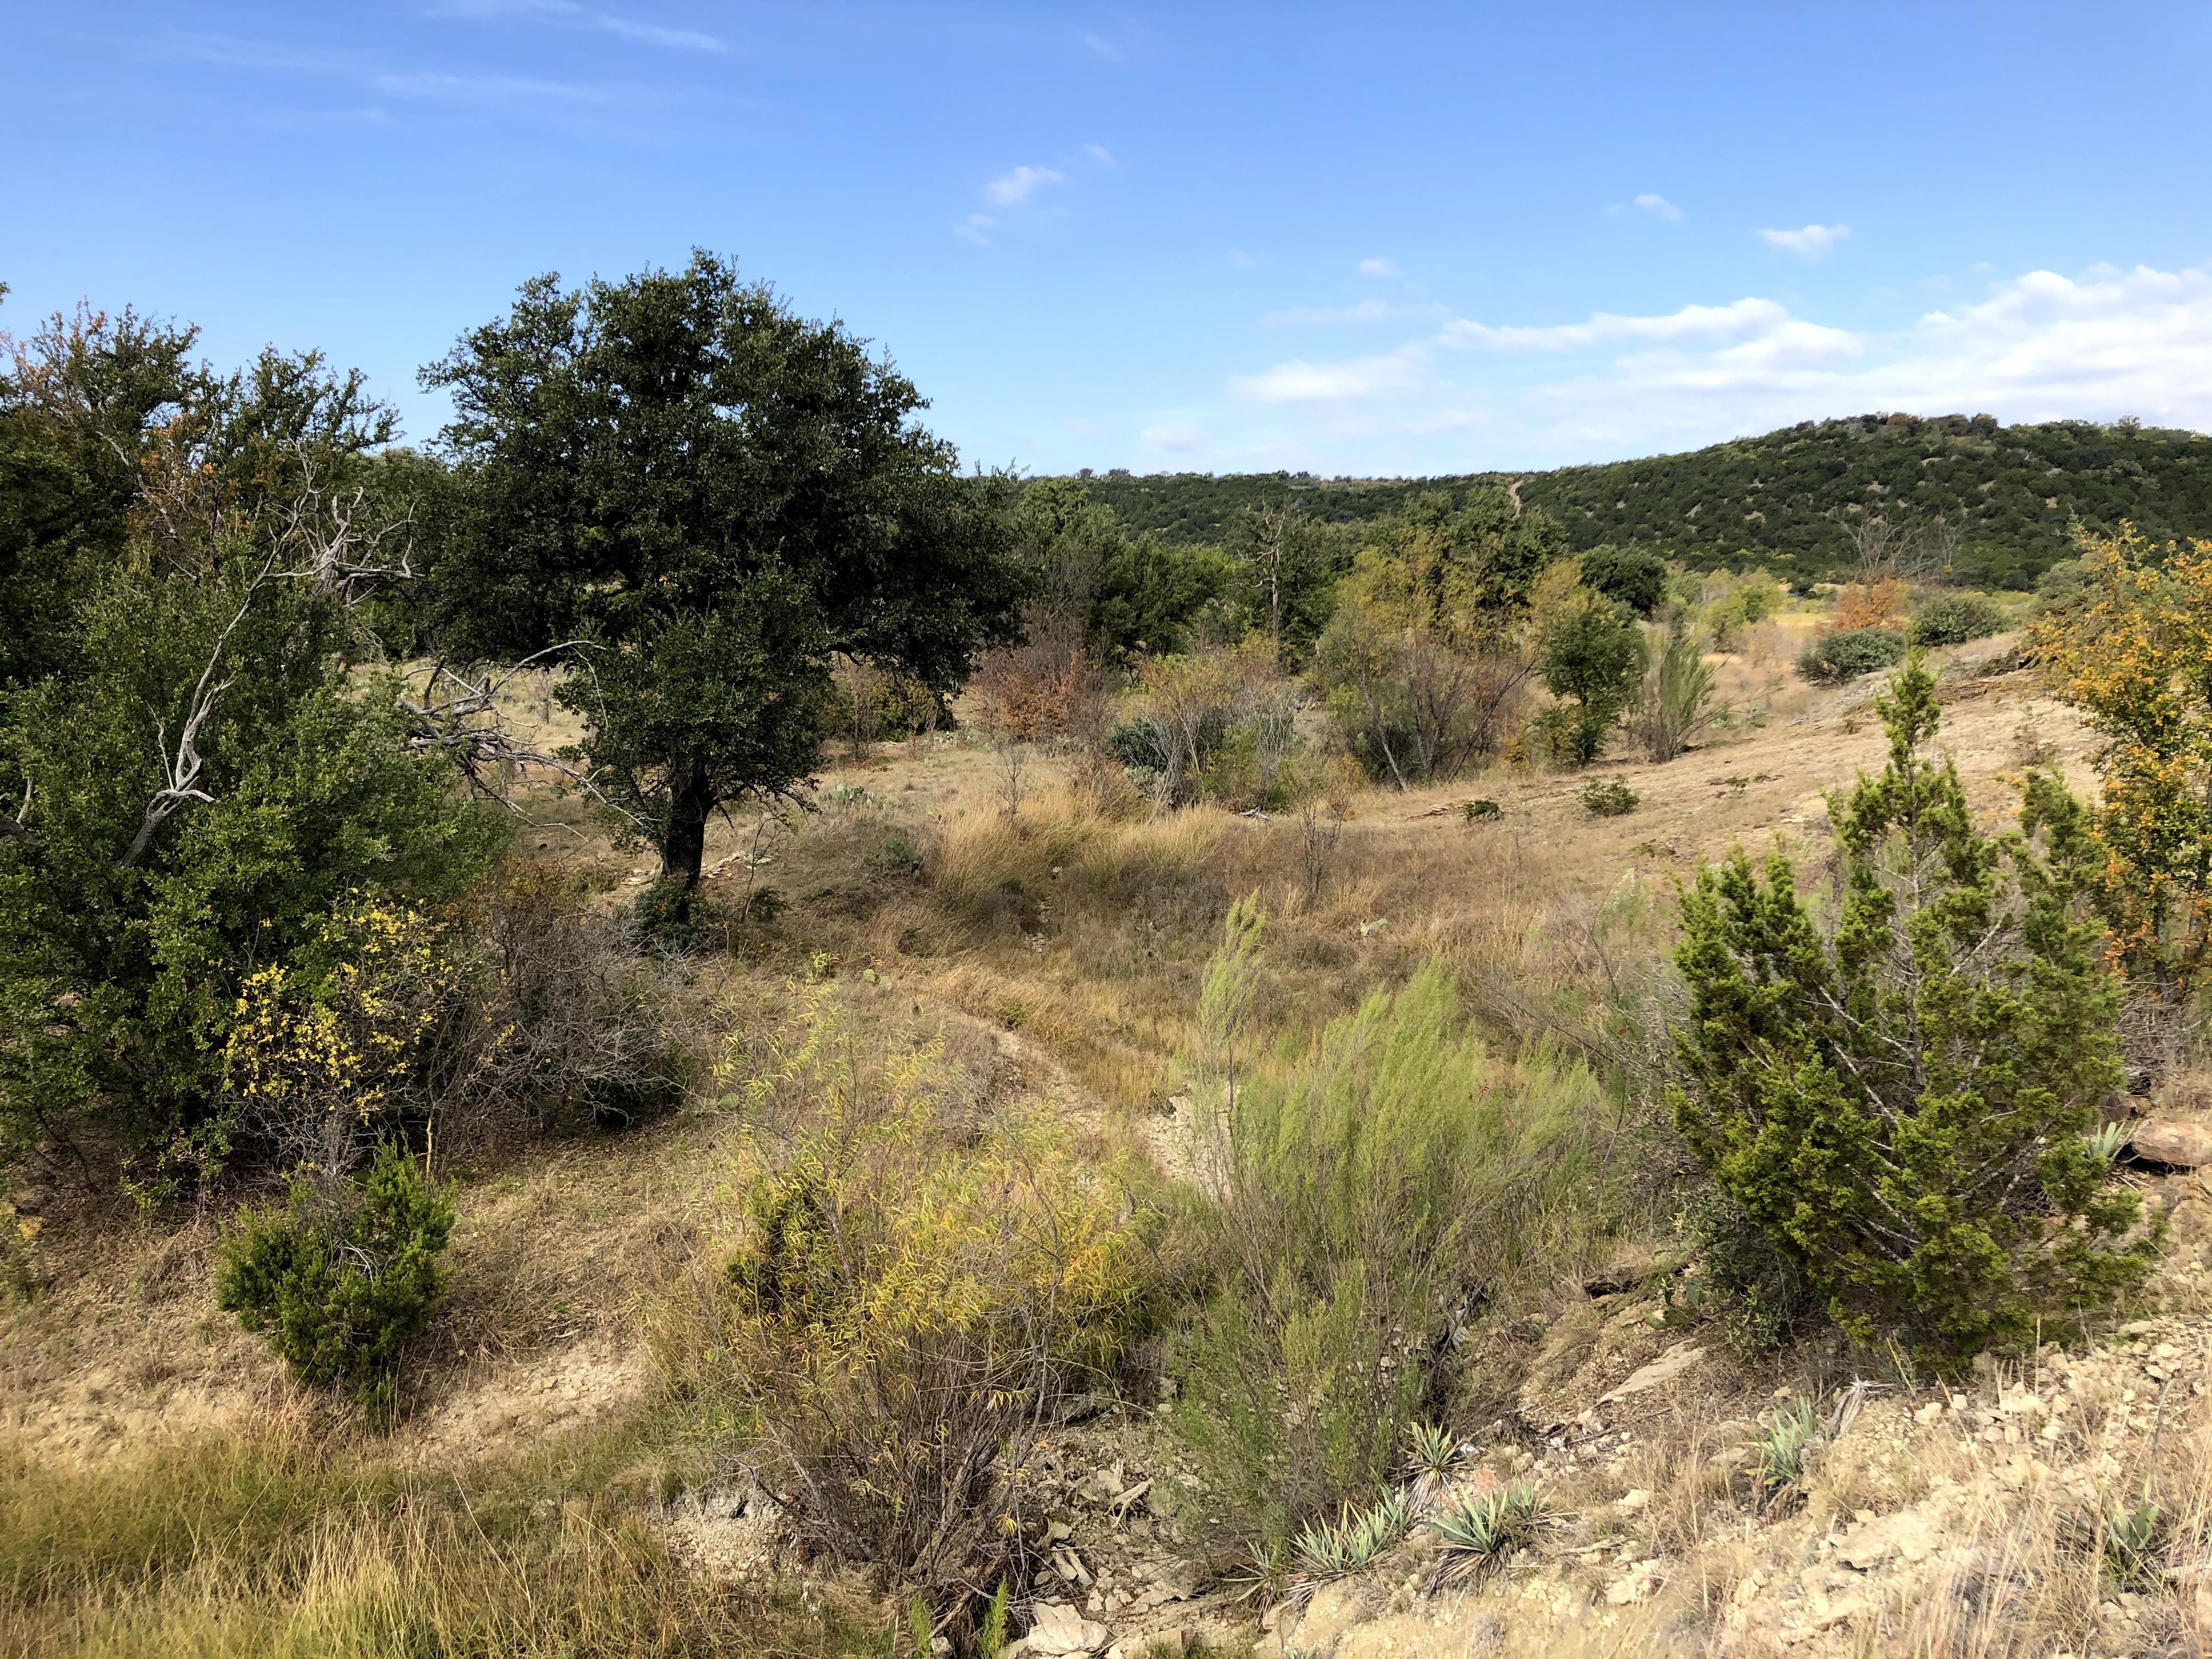 Area on Copeland tract before brush (juniper) removal in 2020